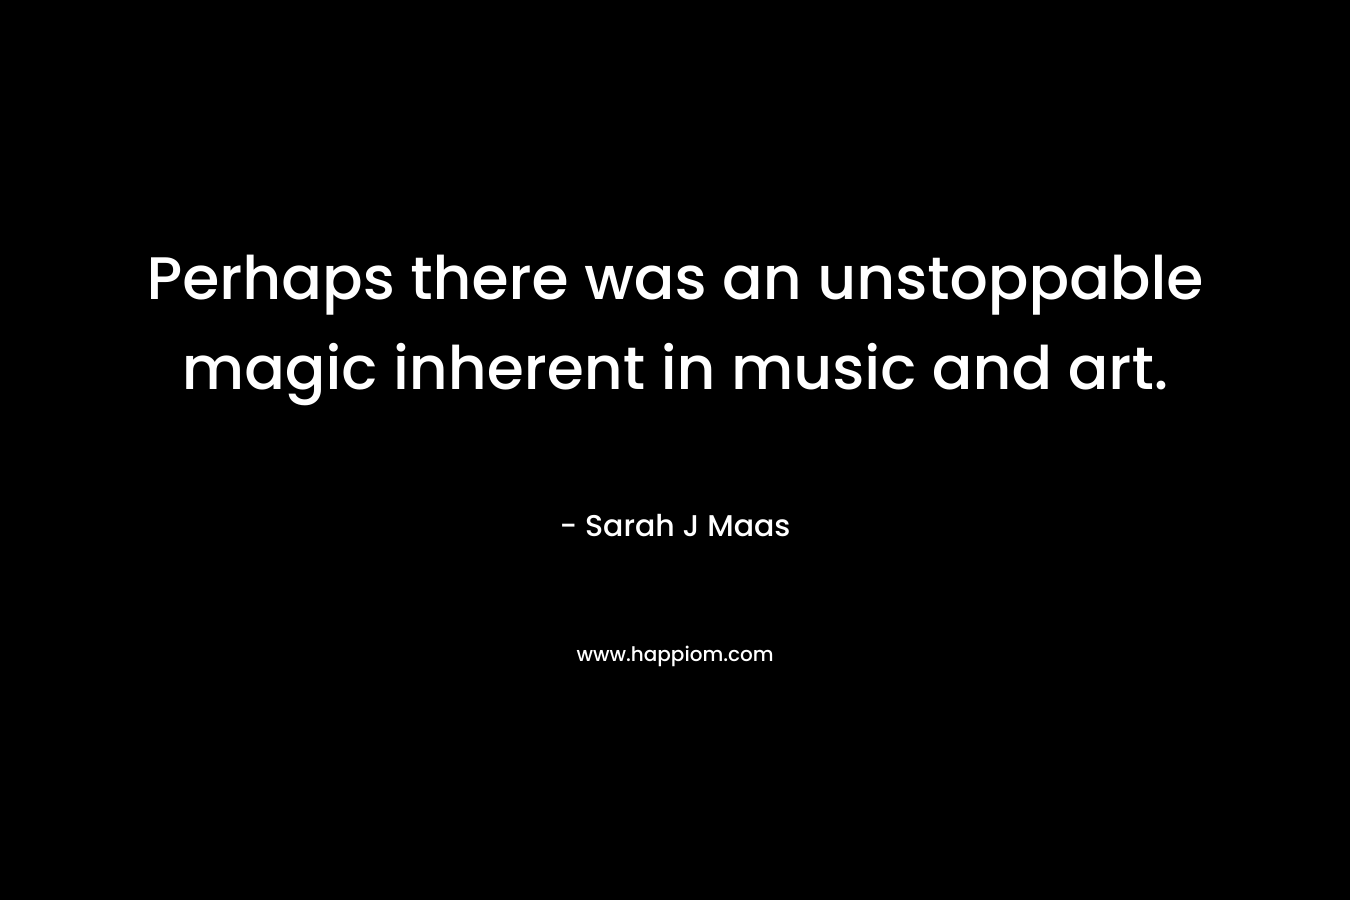 Perhaps there was an unstoppable magic inherent in music and art.